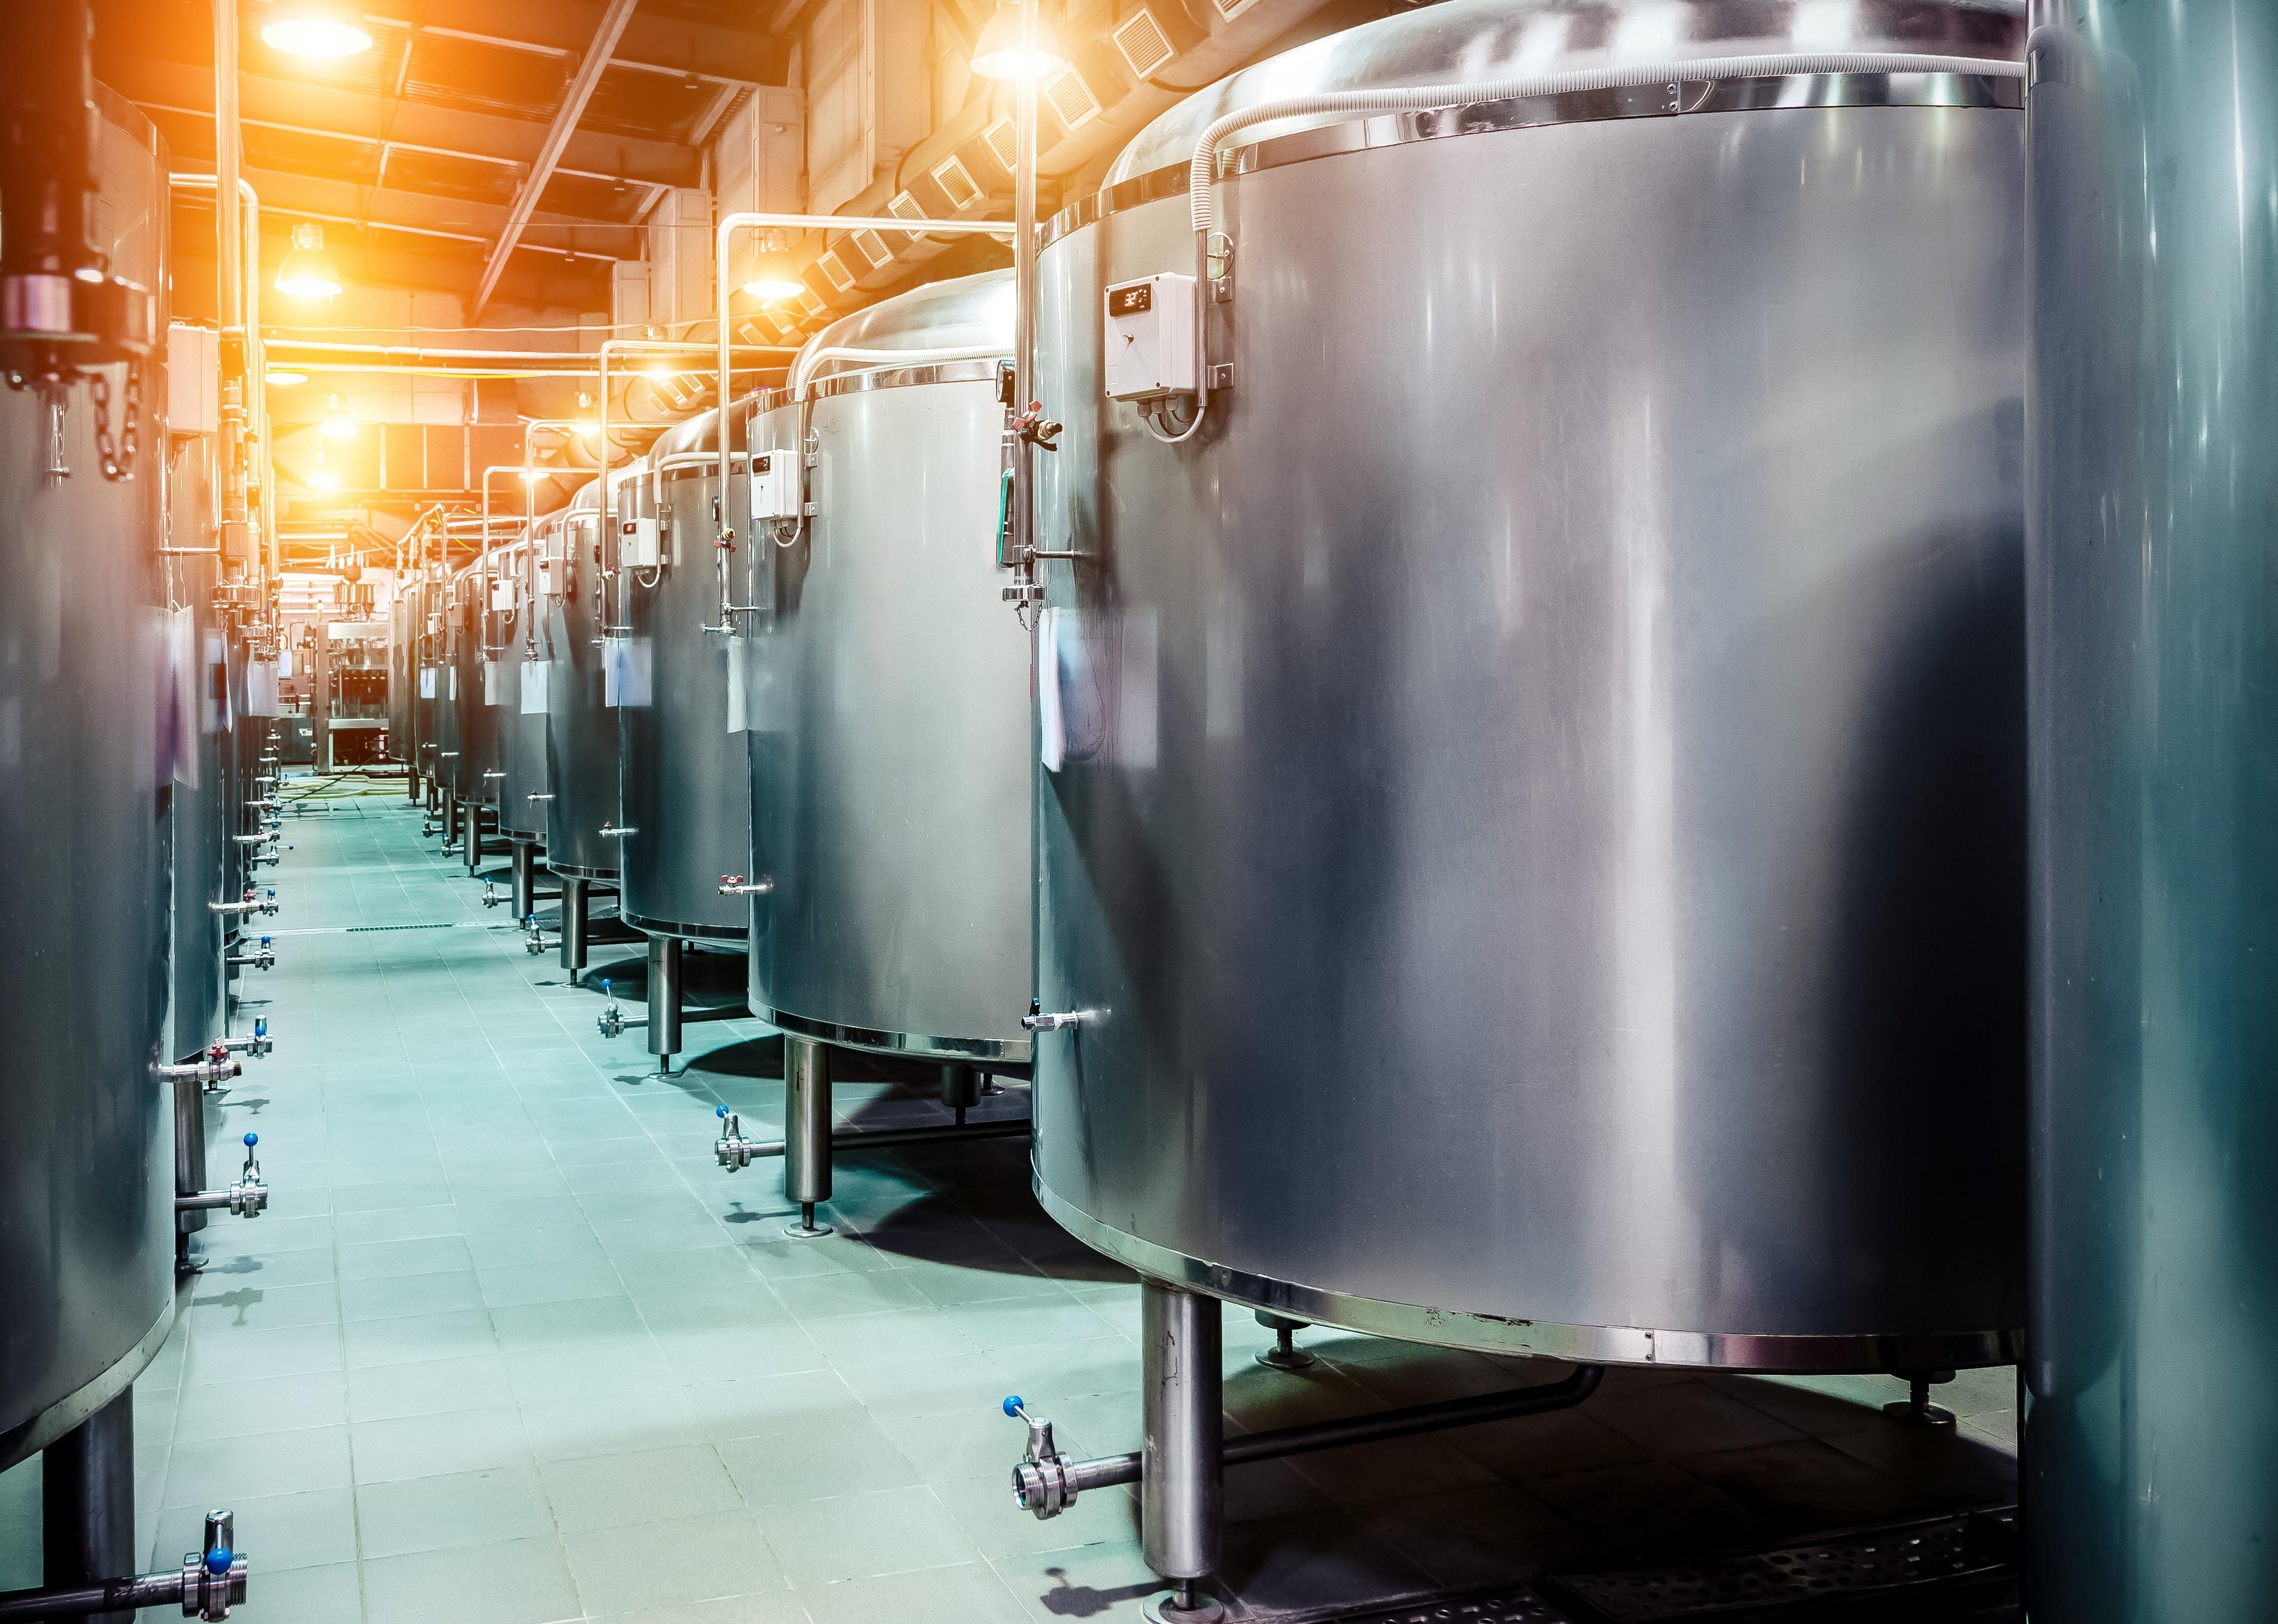 Rows of steel tanks for beer fermentation and maturation